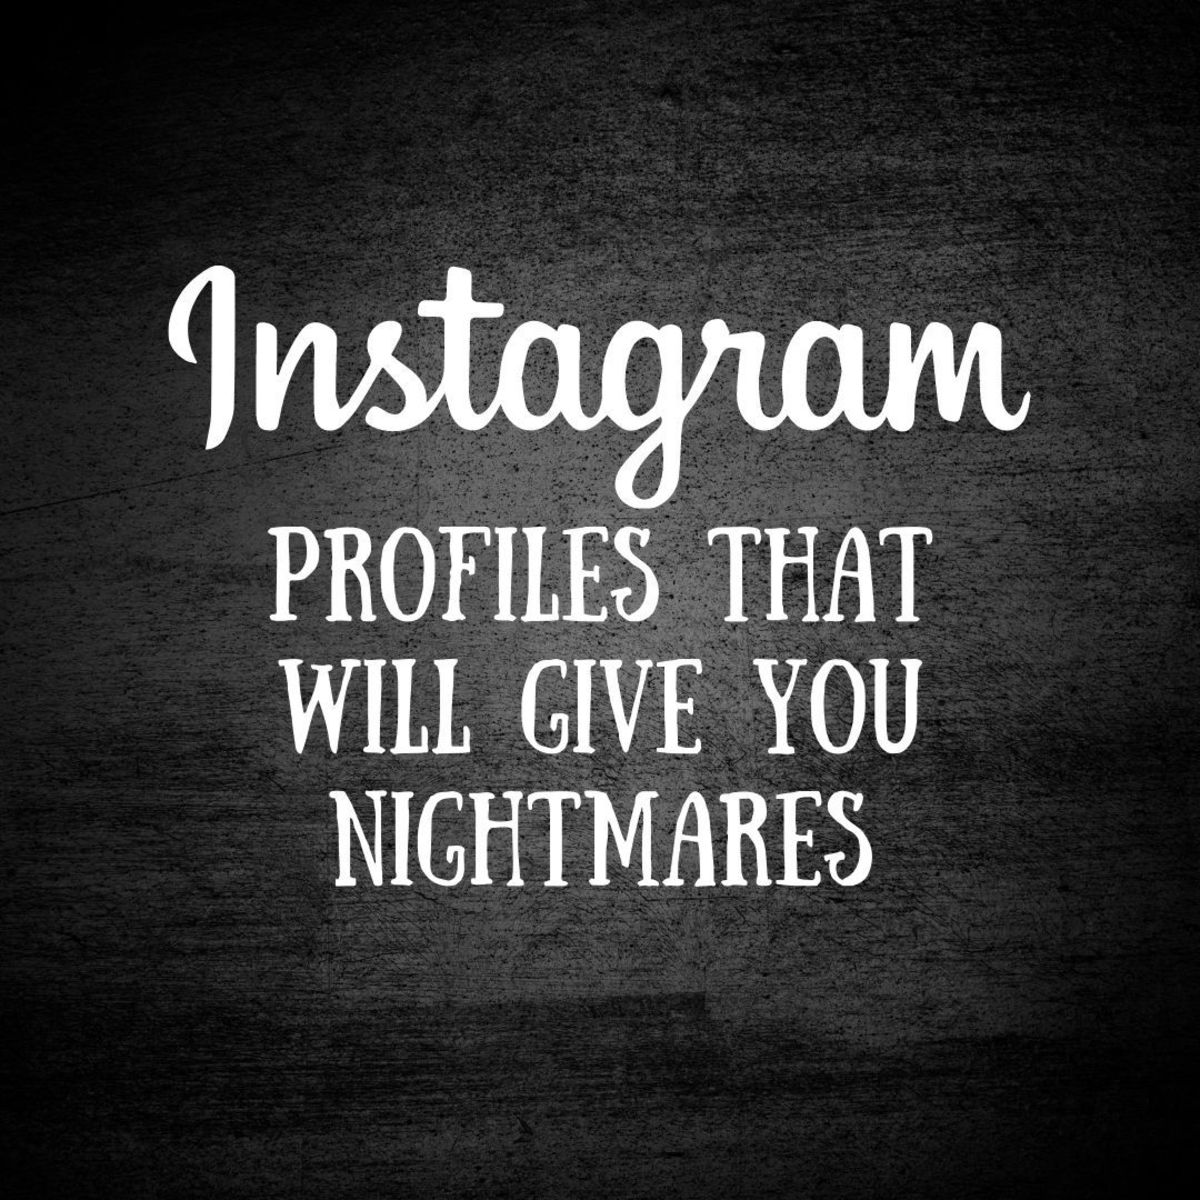 6 Instagram Profiles That Will Creep You Out